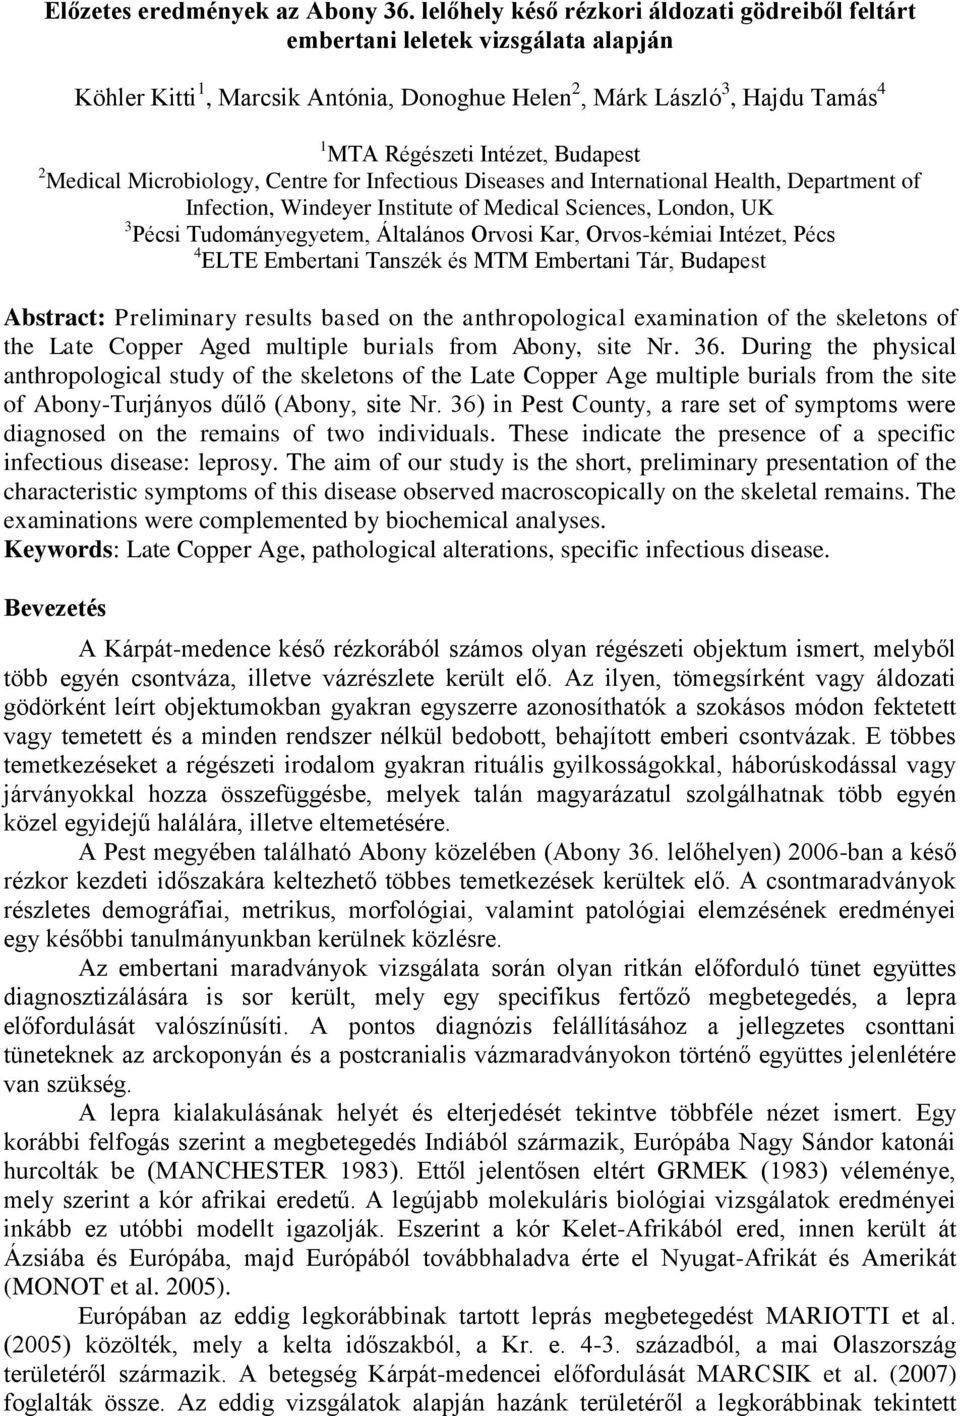 2 Medical Microbiology, Centre for Infectious Diseases and International Health, Department of Infection, Windeyer Institute of Medical Sciences, London, UK 3 Pécsi Tudományegyetem, Általános Orvosi